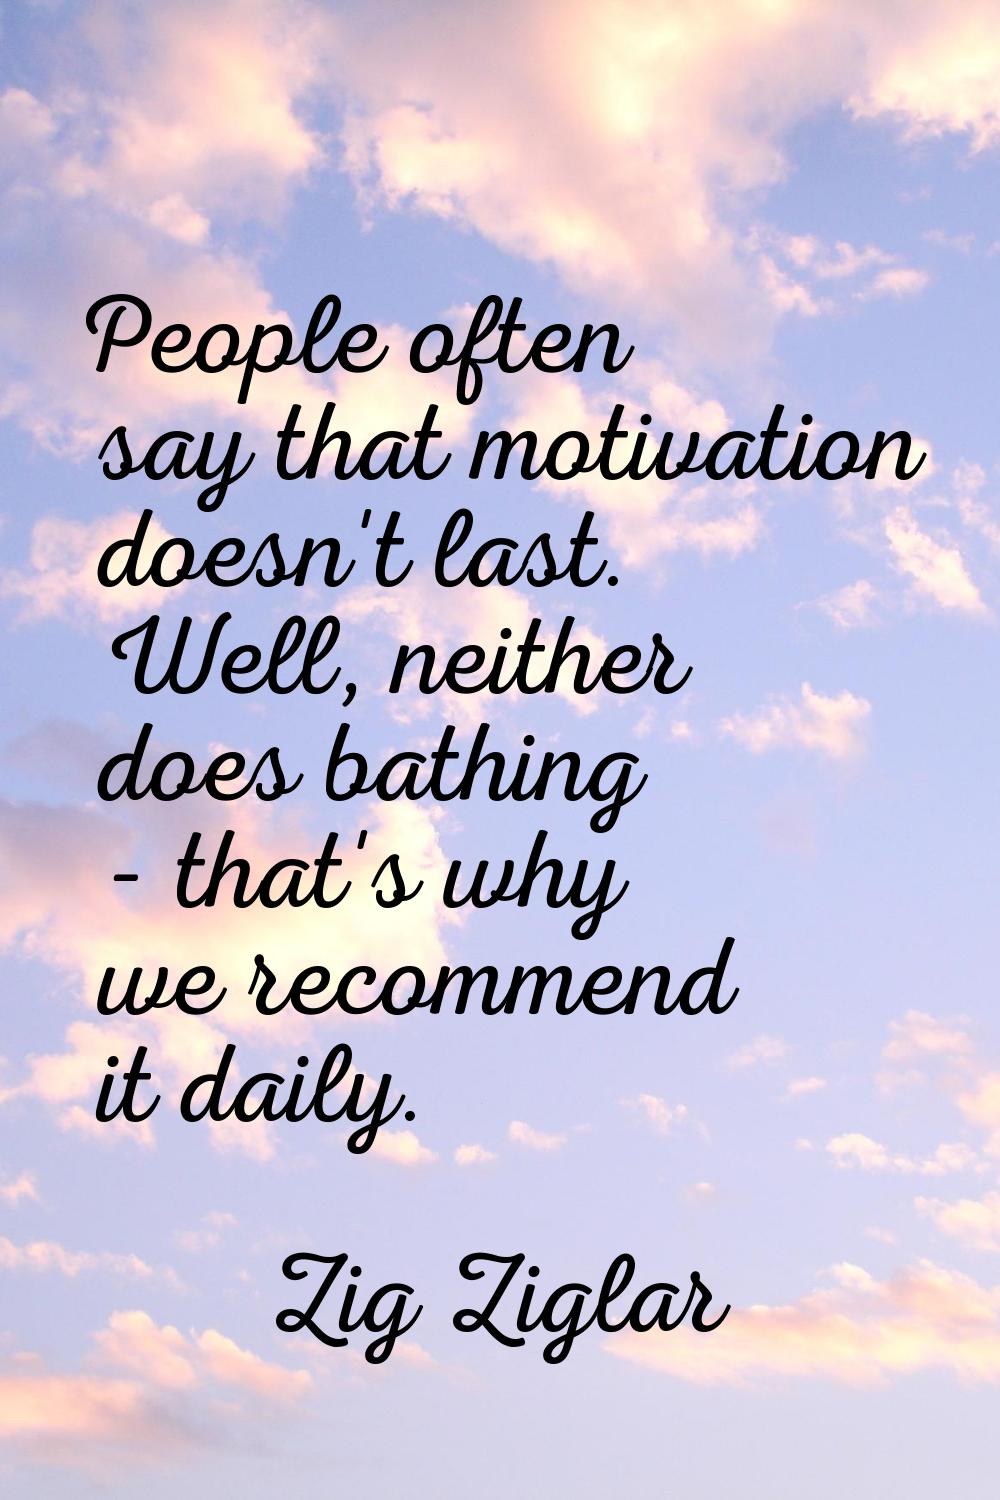 People often say that motivation doesn't last. Well, neither does bathing - that's why we recommend